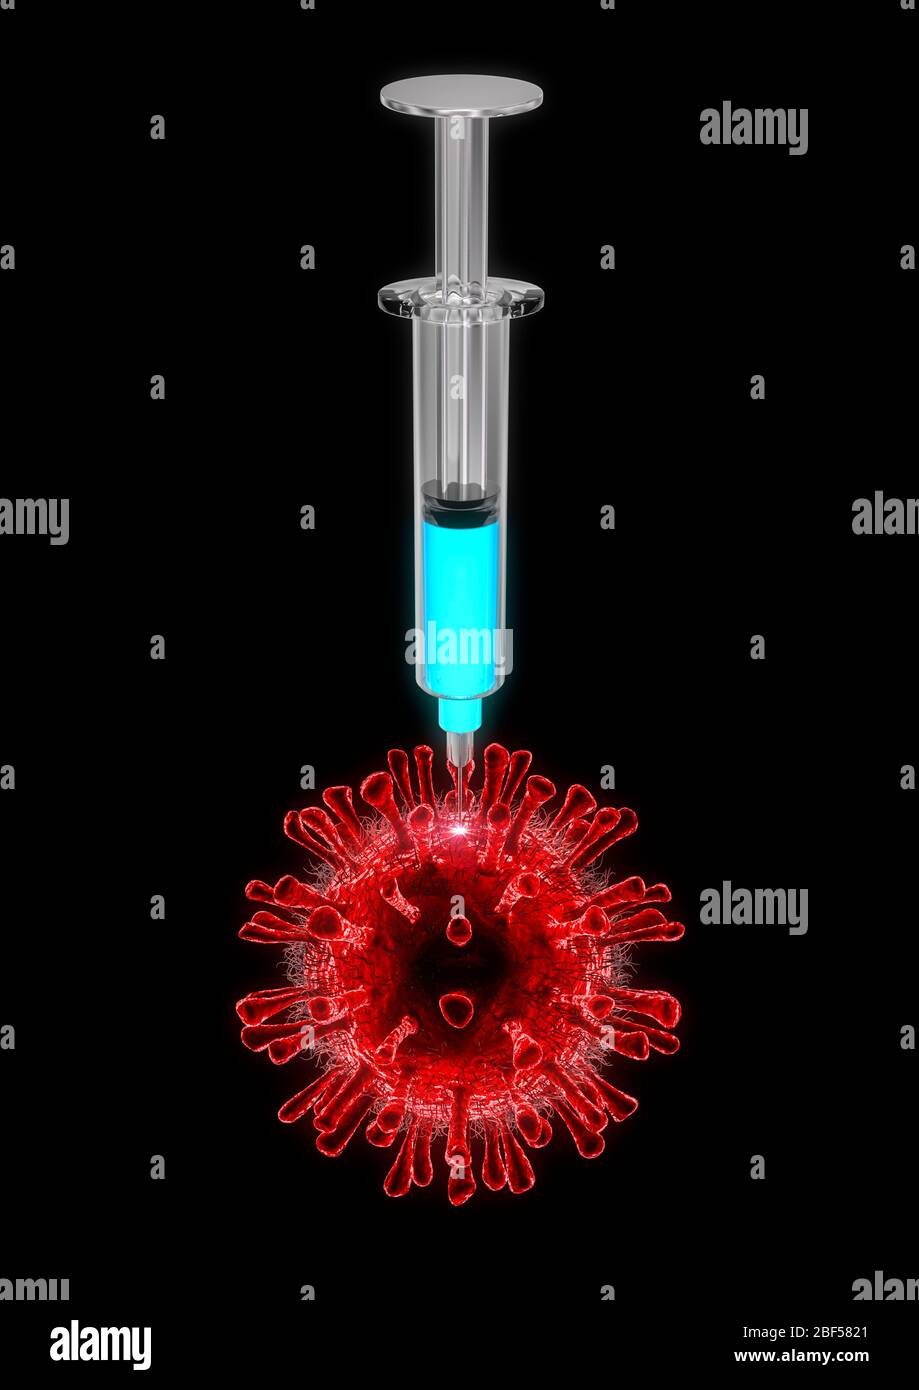 Covid-19 vaccine concept / 3D illustration of large medical syringe injecting red coronavirus cell isolated on black background Stock Photo